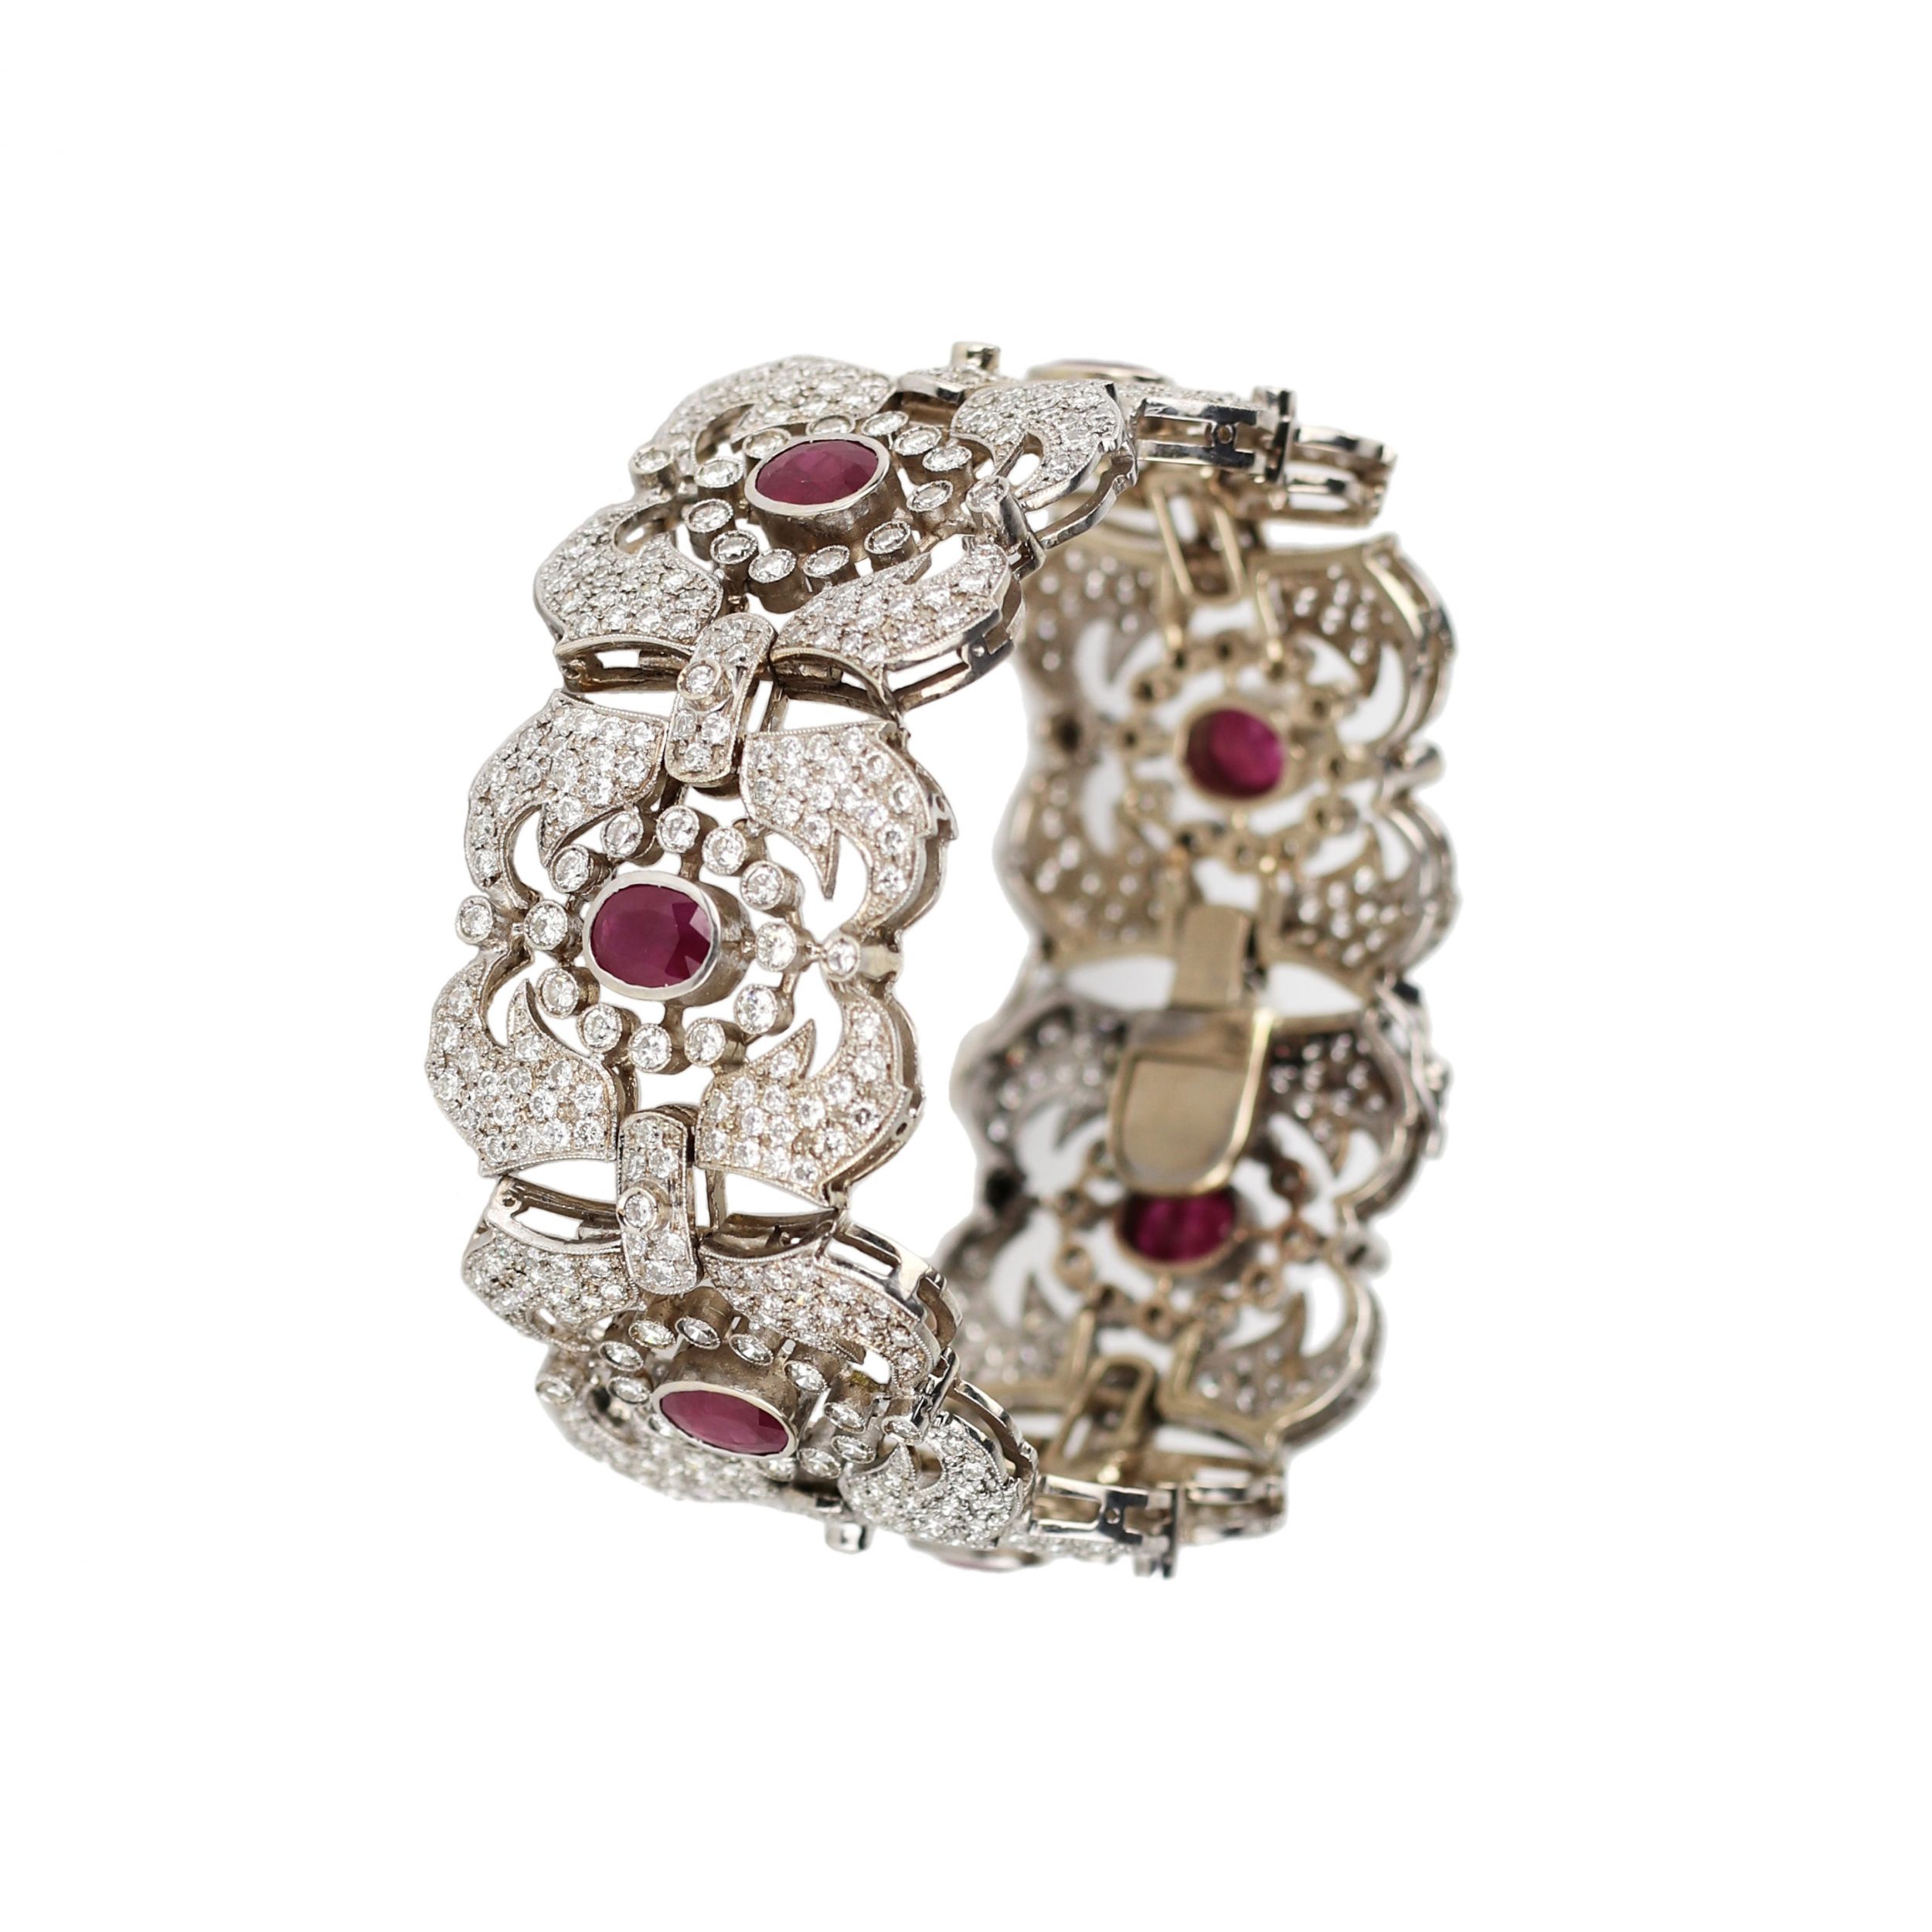 Gold-bracelet-with-rubies-and-diamonds-